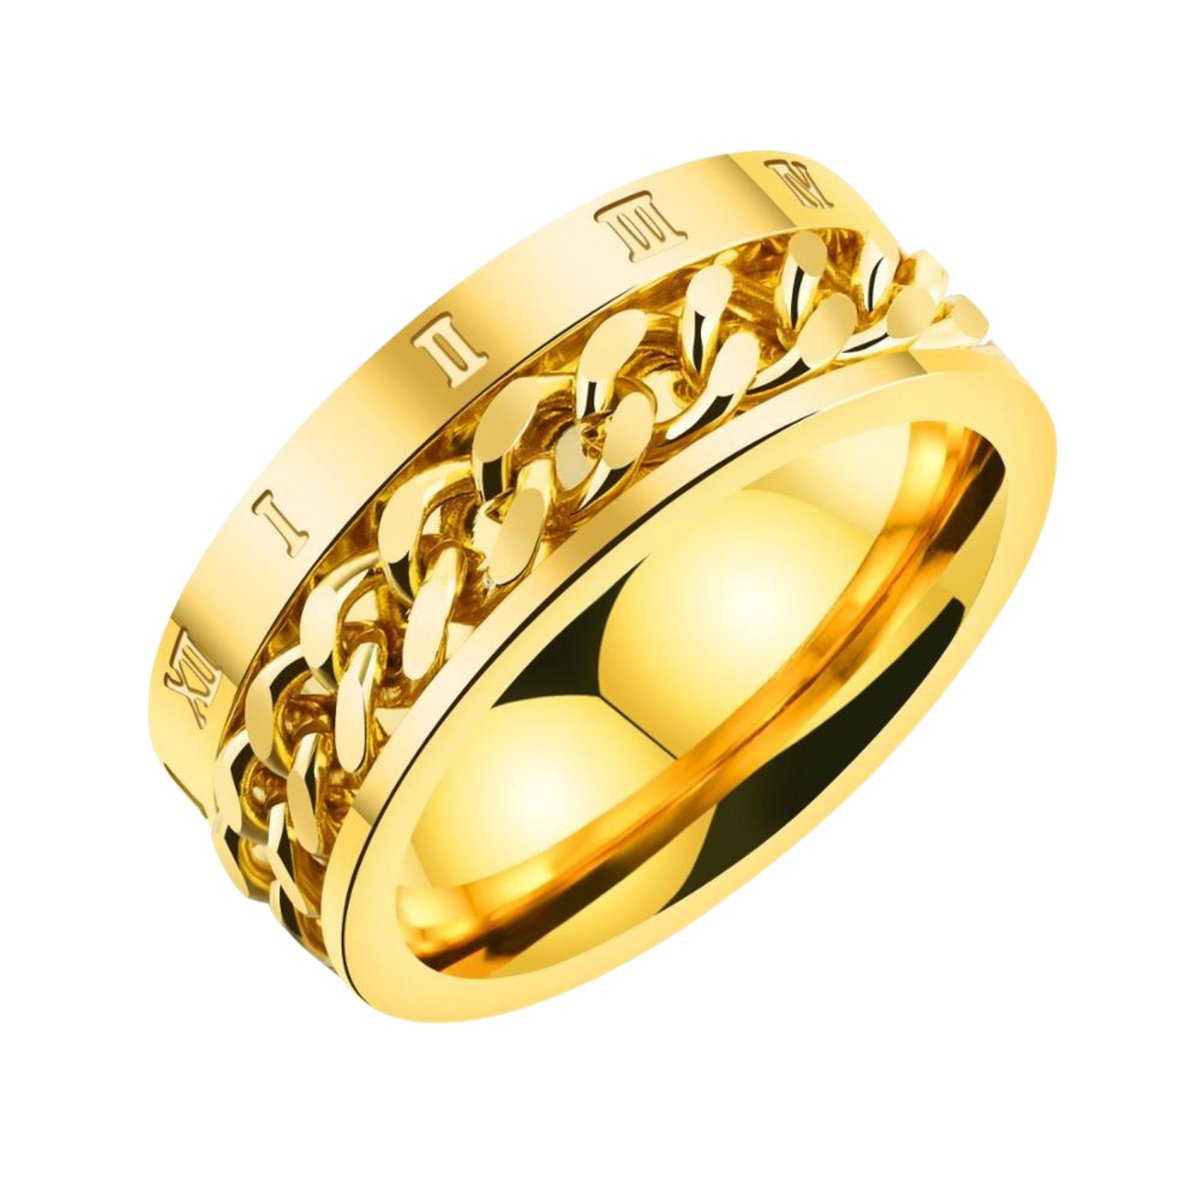 Anxiety Ring - (Rome) - Stress Ring - Fidget Ring - Anxiety Ring For Finger - Draaibare Ring - Spinning Ring - Goud - (17.75 mm / maat 56)